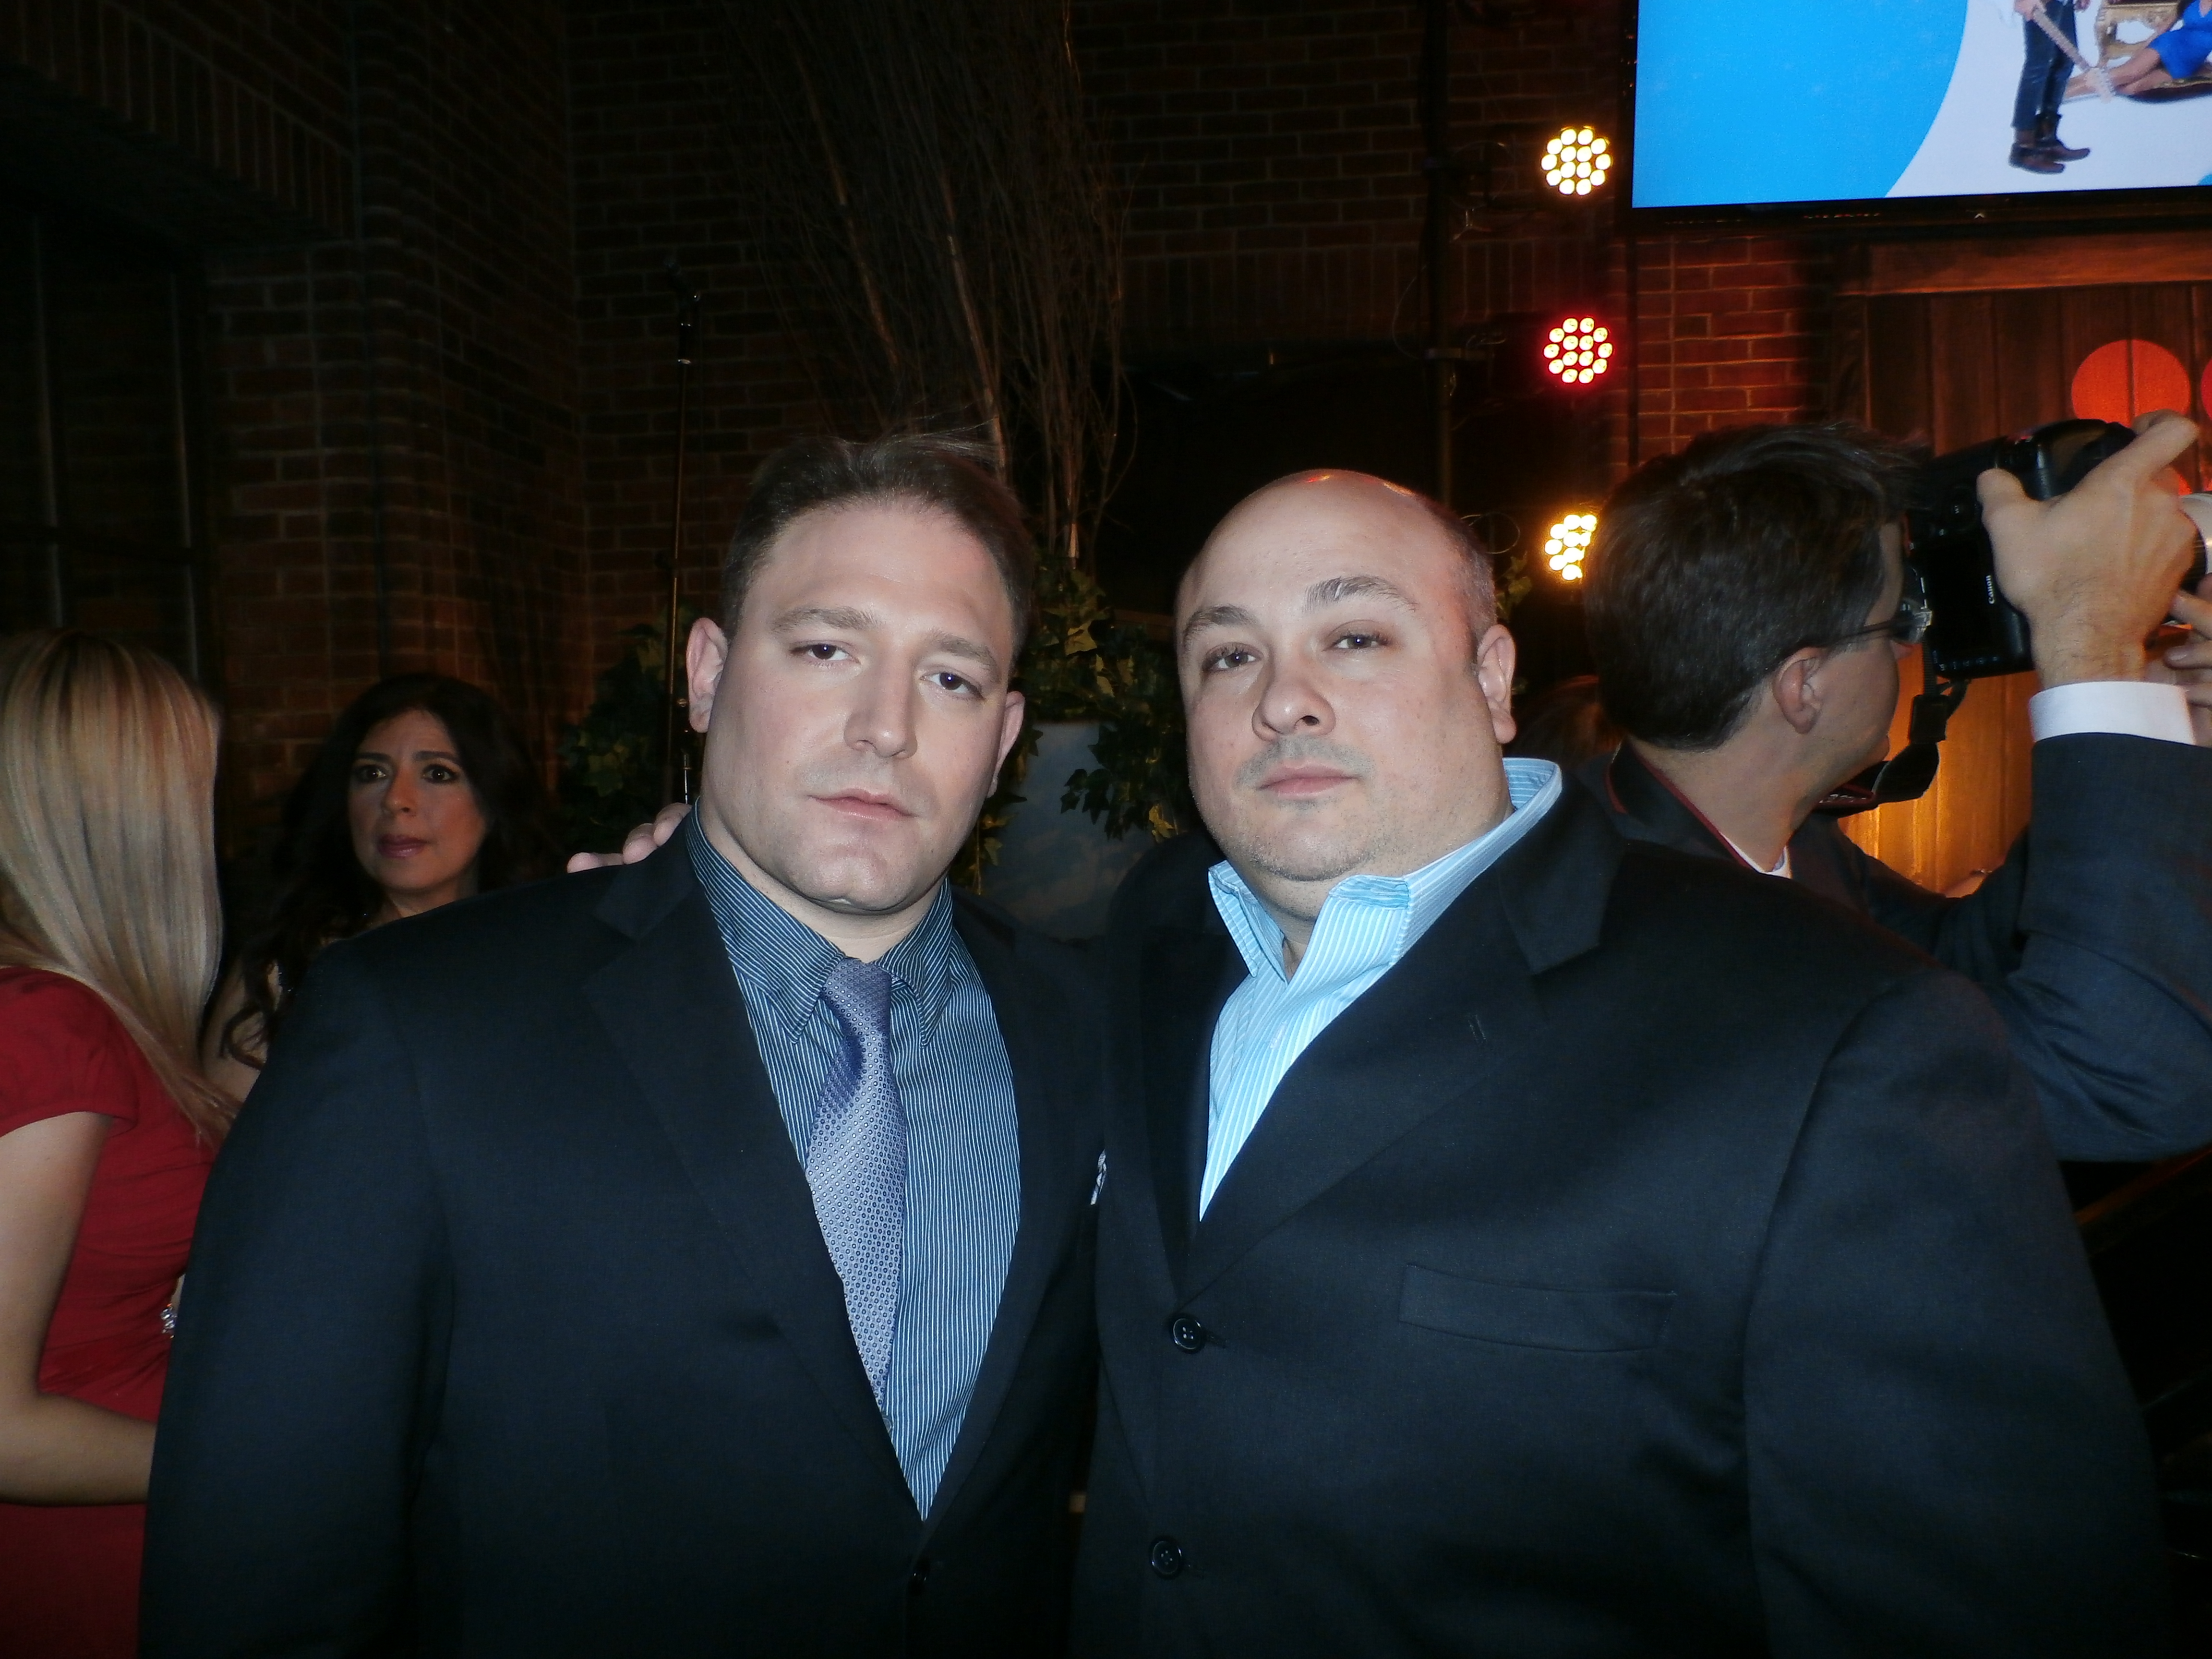 David Weintraub and Dominic Capone at Reelz premiere in NY